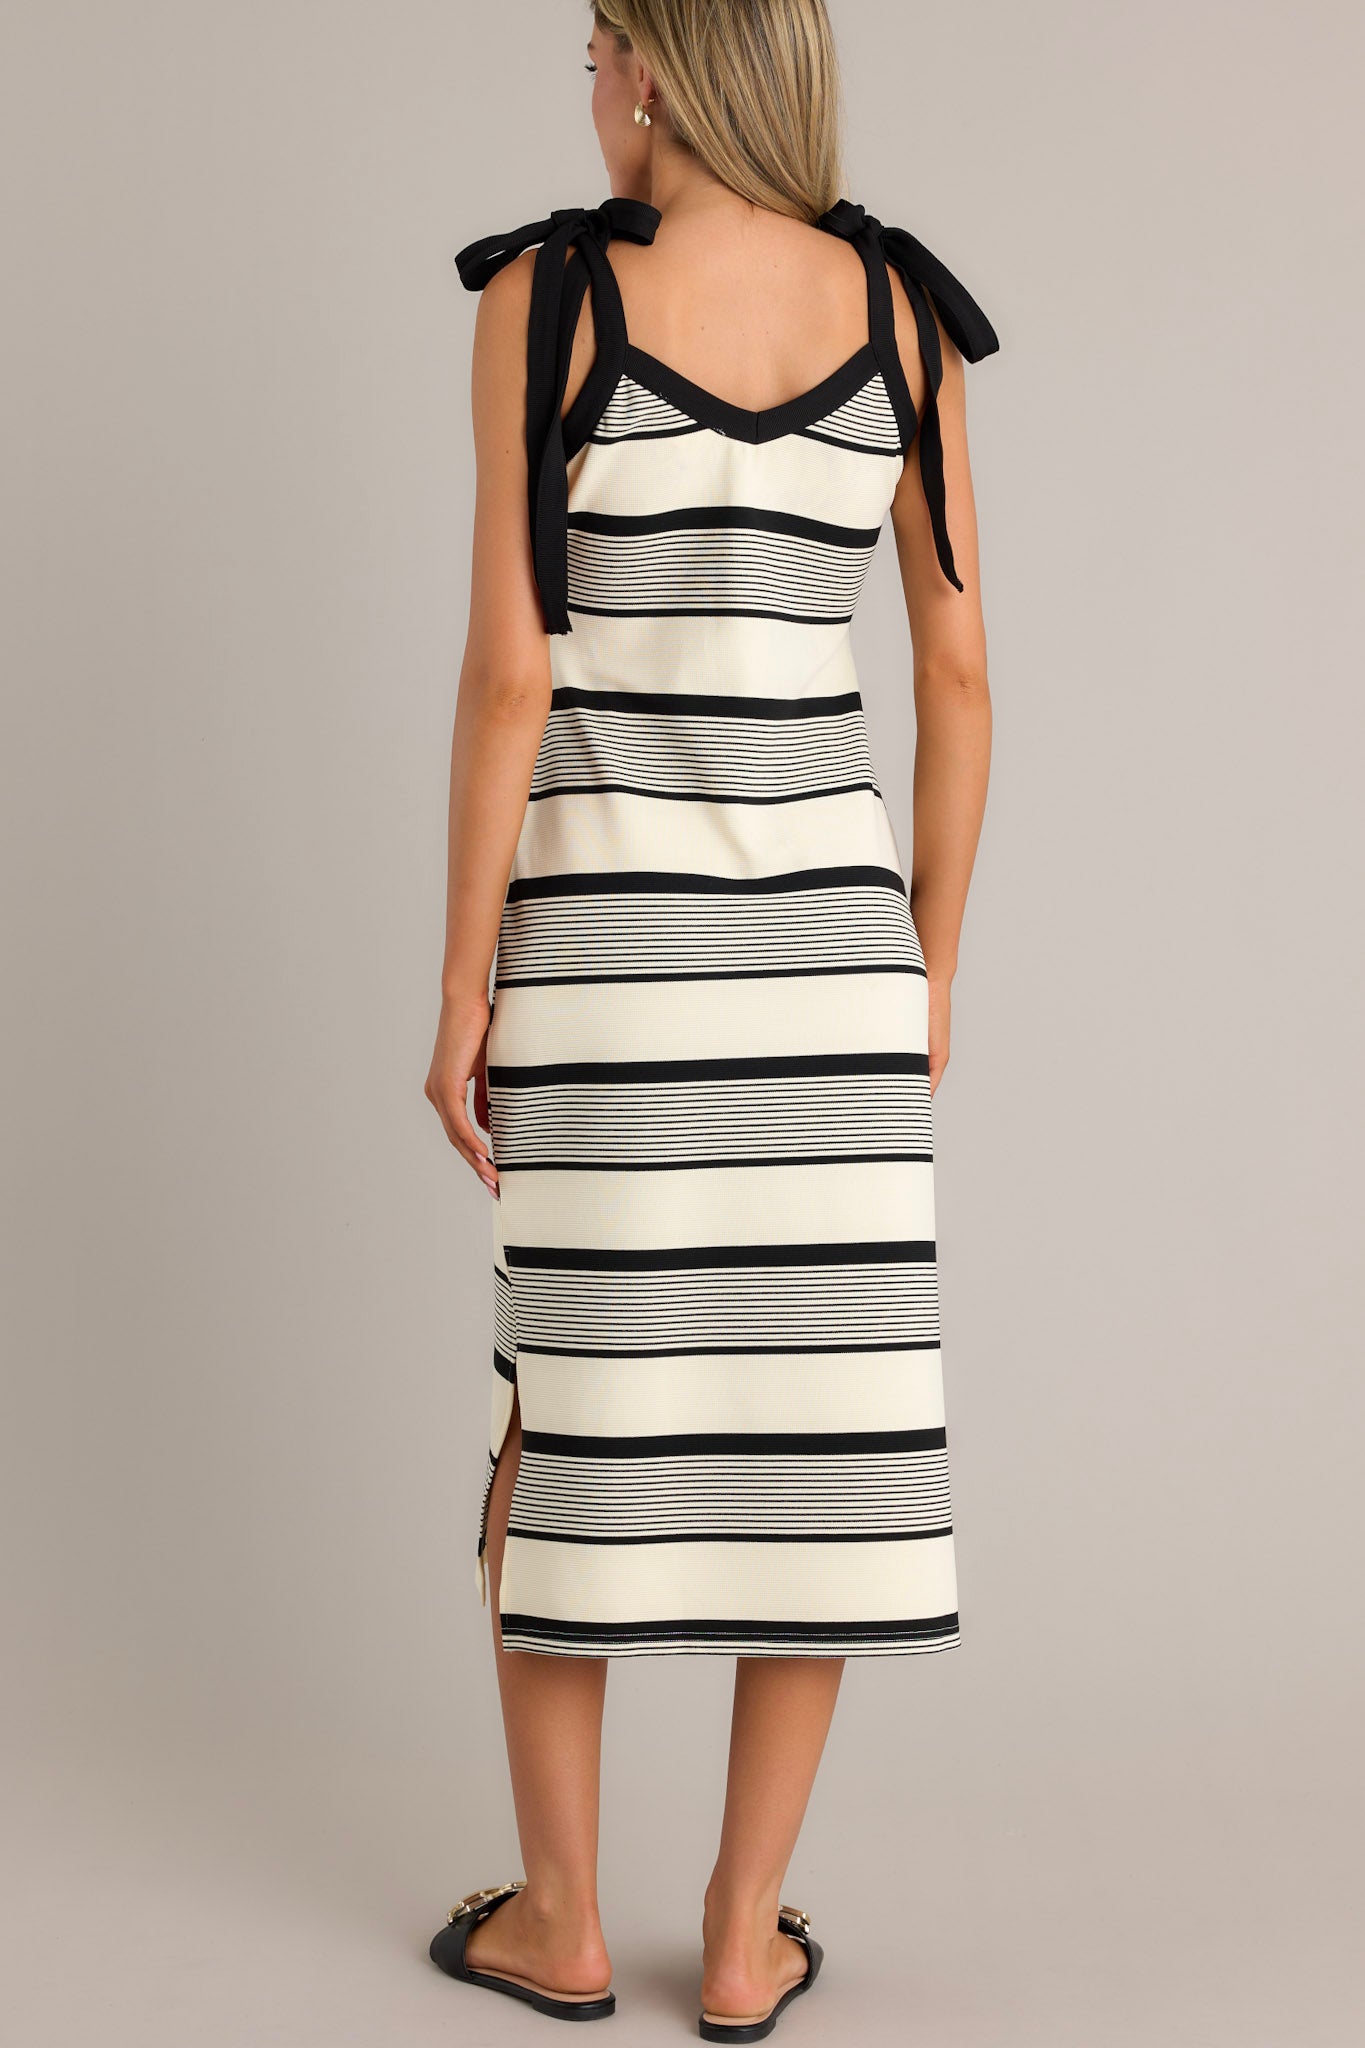 Back view of a black striped midi dress highlighting the thick self-tie straps, unique stripe pattern, and side slits.